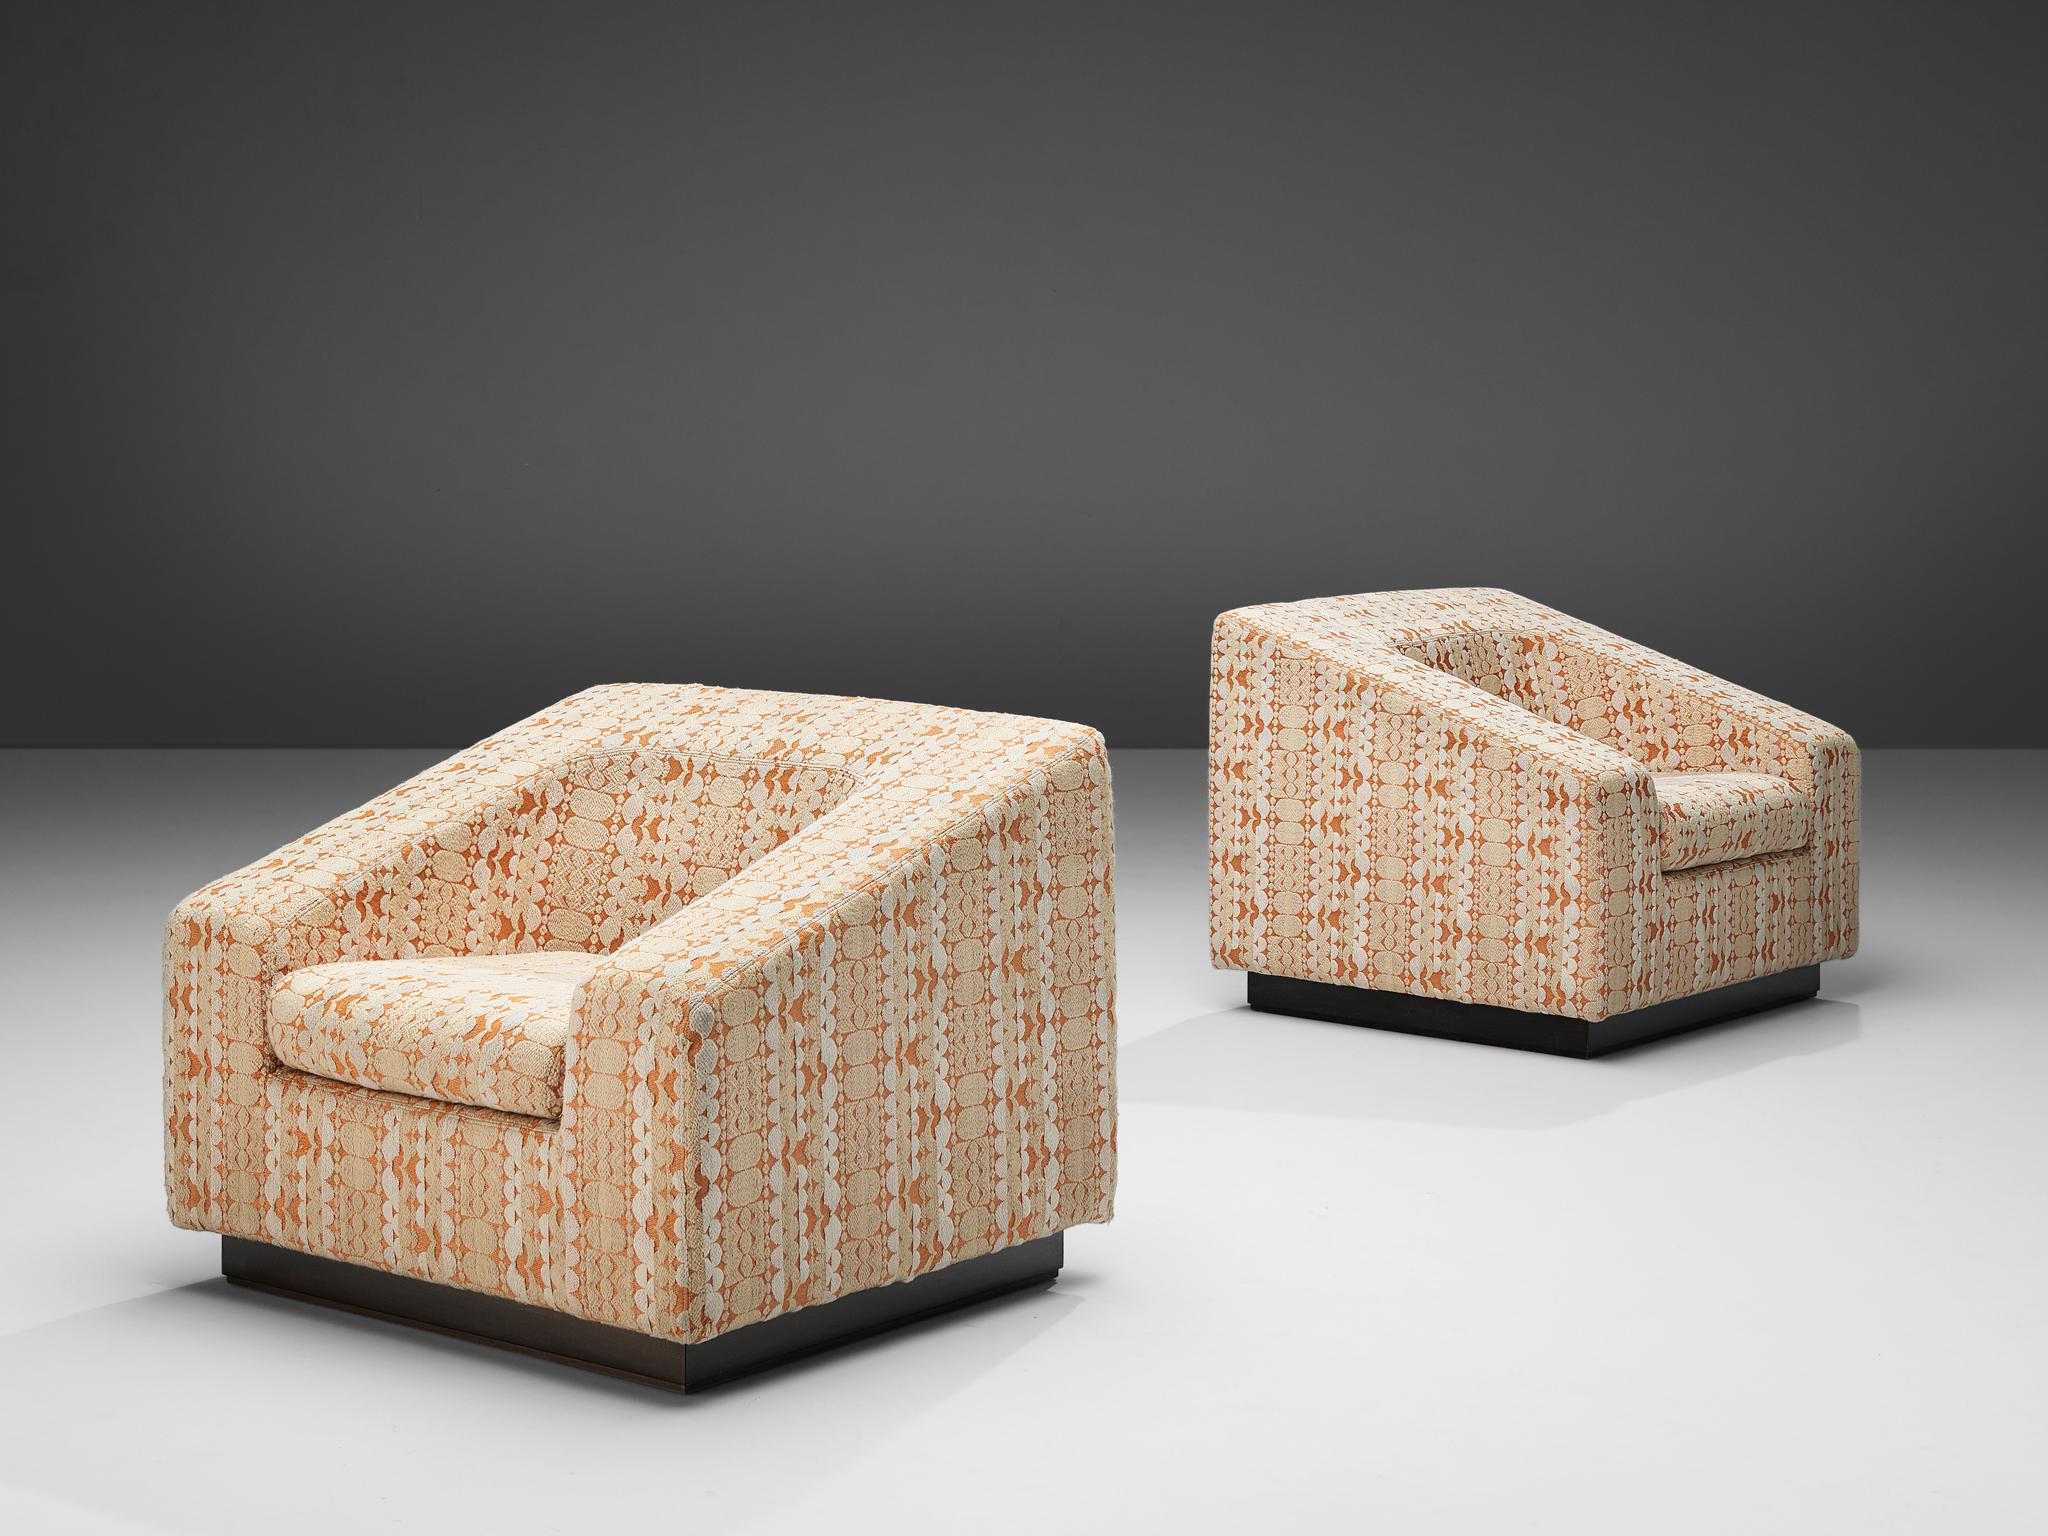 Emilio Guarnacci for Uno Pi (1P) - Industria Chimica per l'Arredamento, pair of lounge chairs, model 'Dahlia', wood, original patterned fabric upholstery, Italy, 1967.

These Italian lounge chairs have an iconic appearance with their angular and